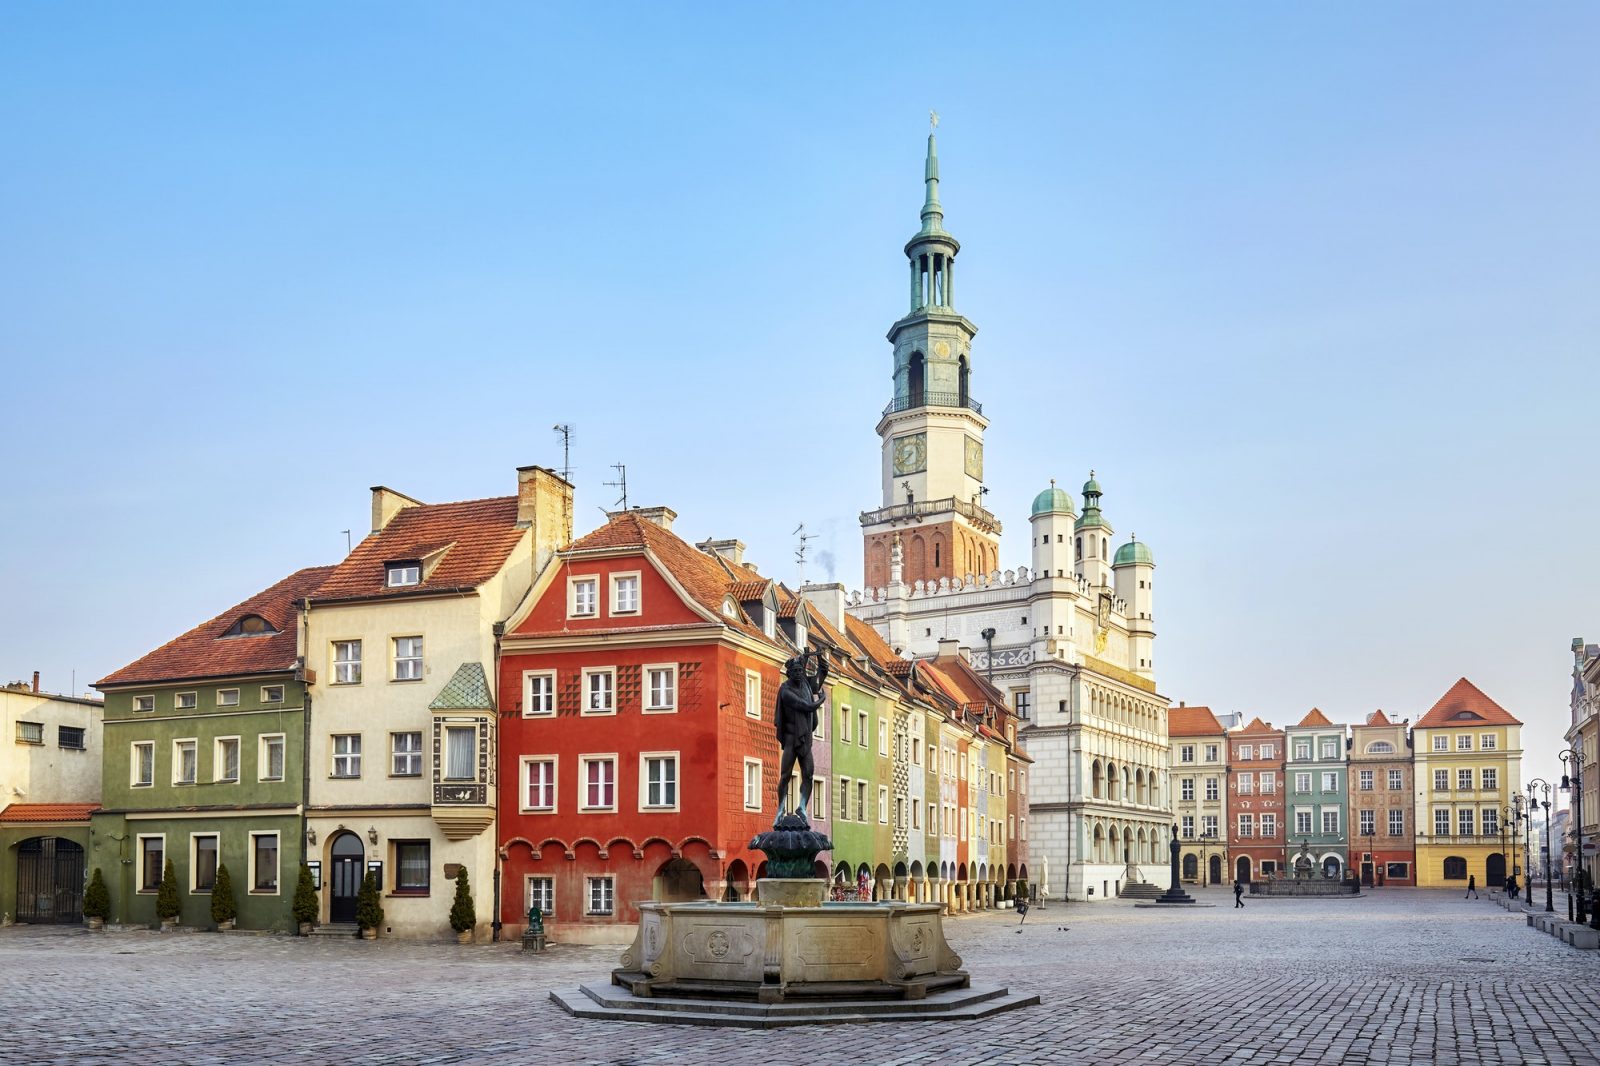 Market Square in the Poznan Old Town, Poland